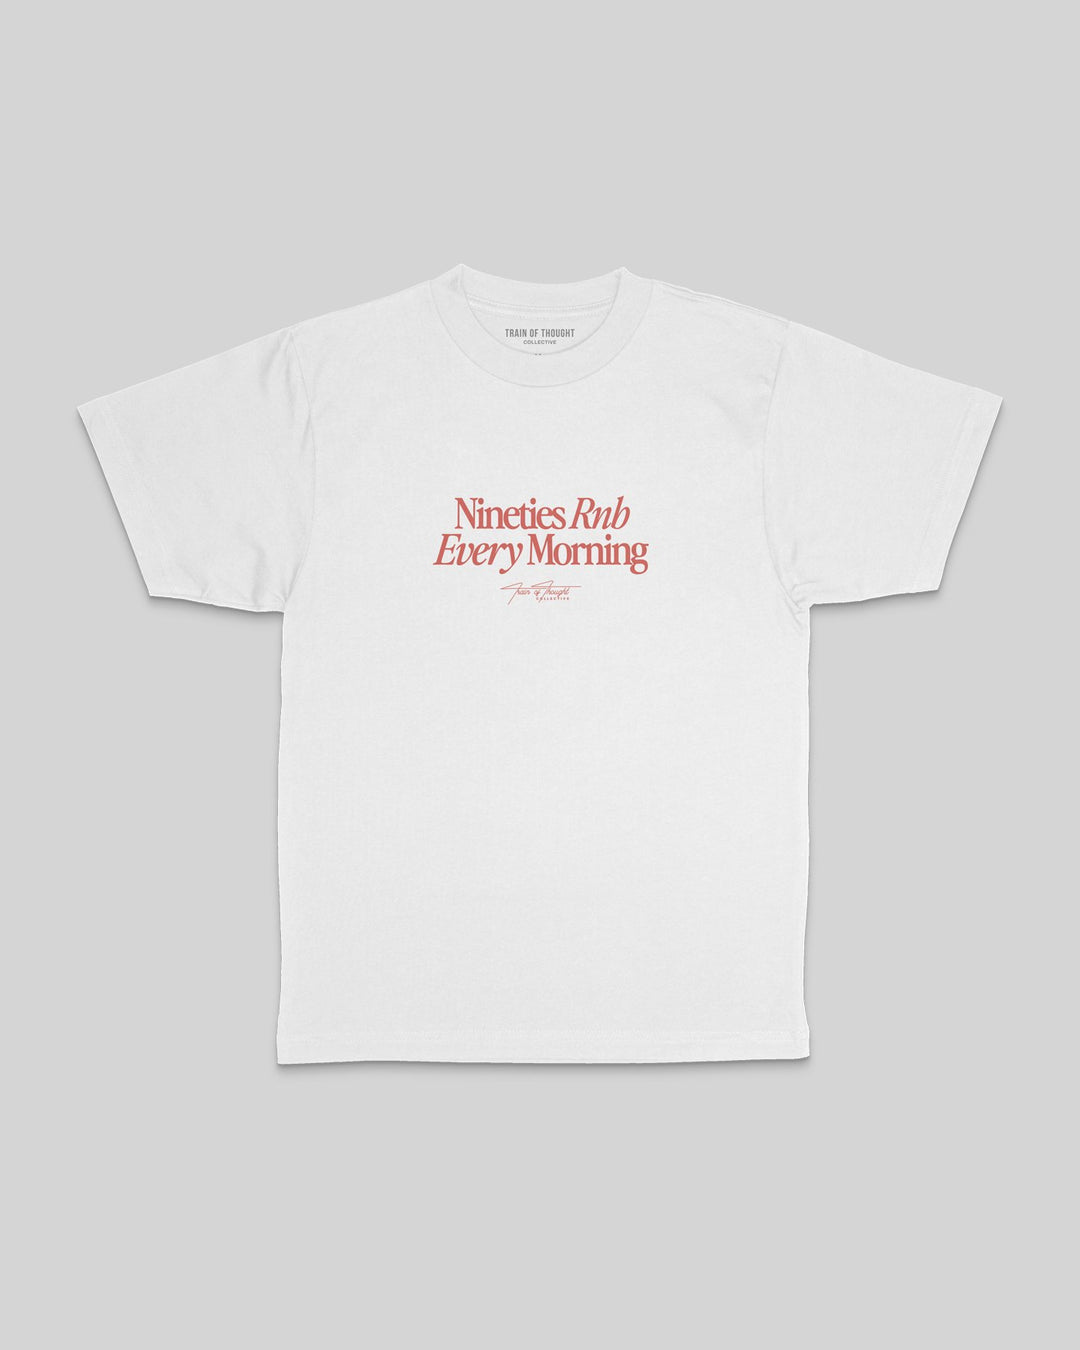 Nineties Rnb Every Morning $8 Tee V2 - trainofthoughtcollective